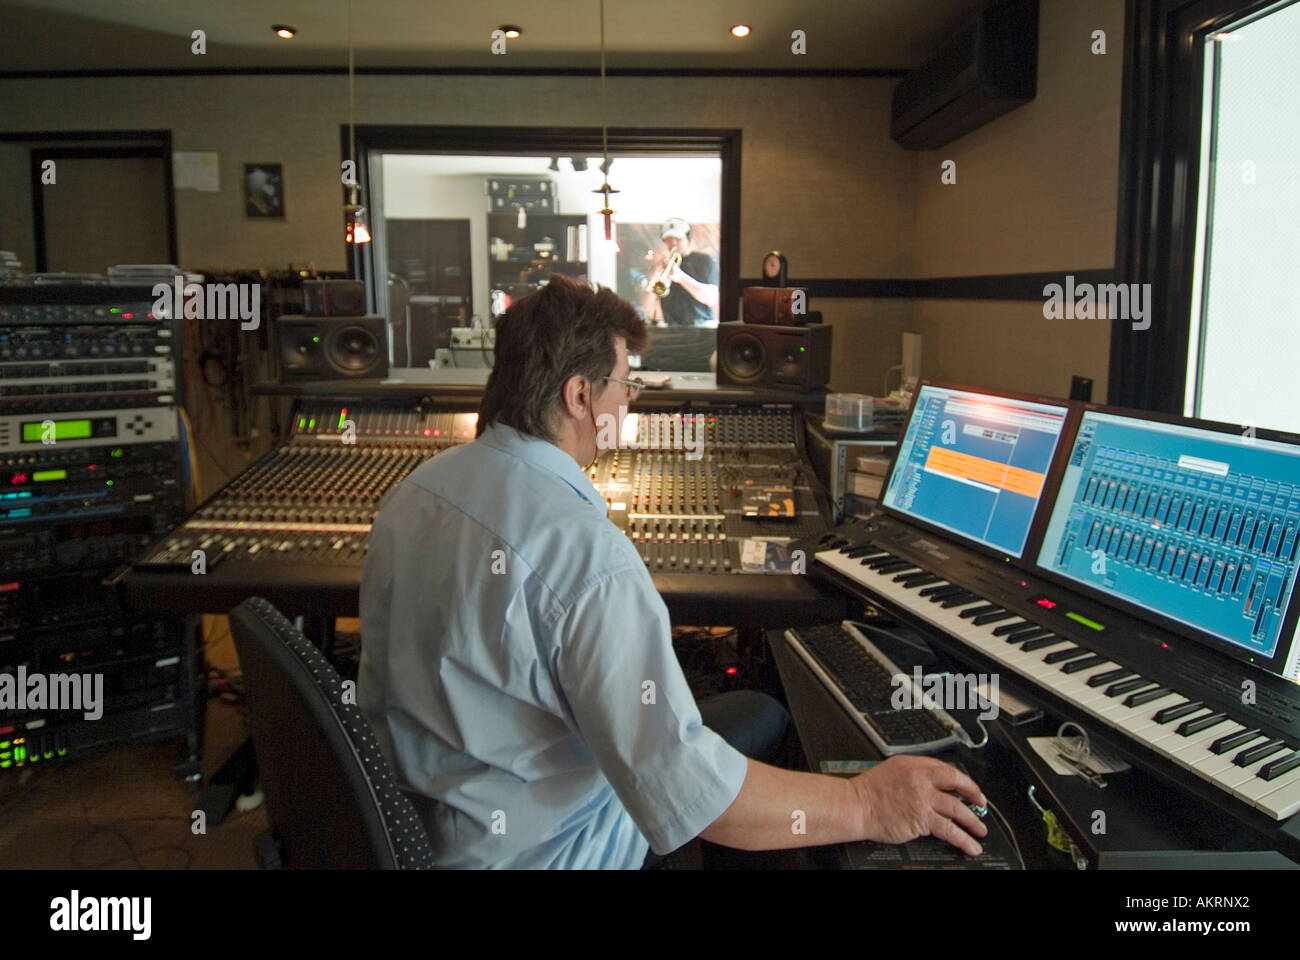 working in recording studio musician audio engineer two men with musical instruments keybords and trumpet trump in a studio Stock Photo